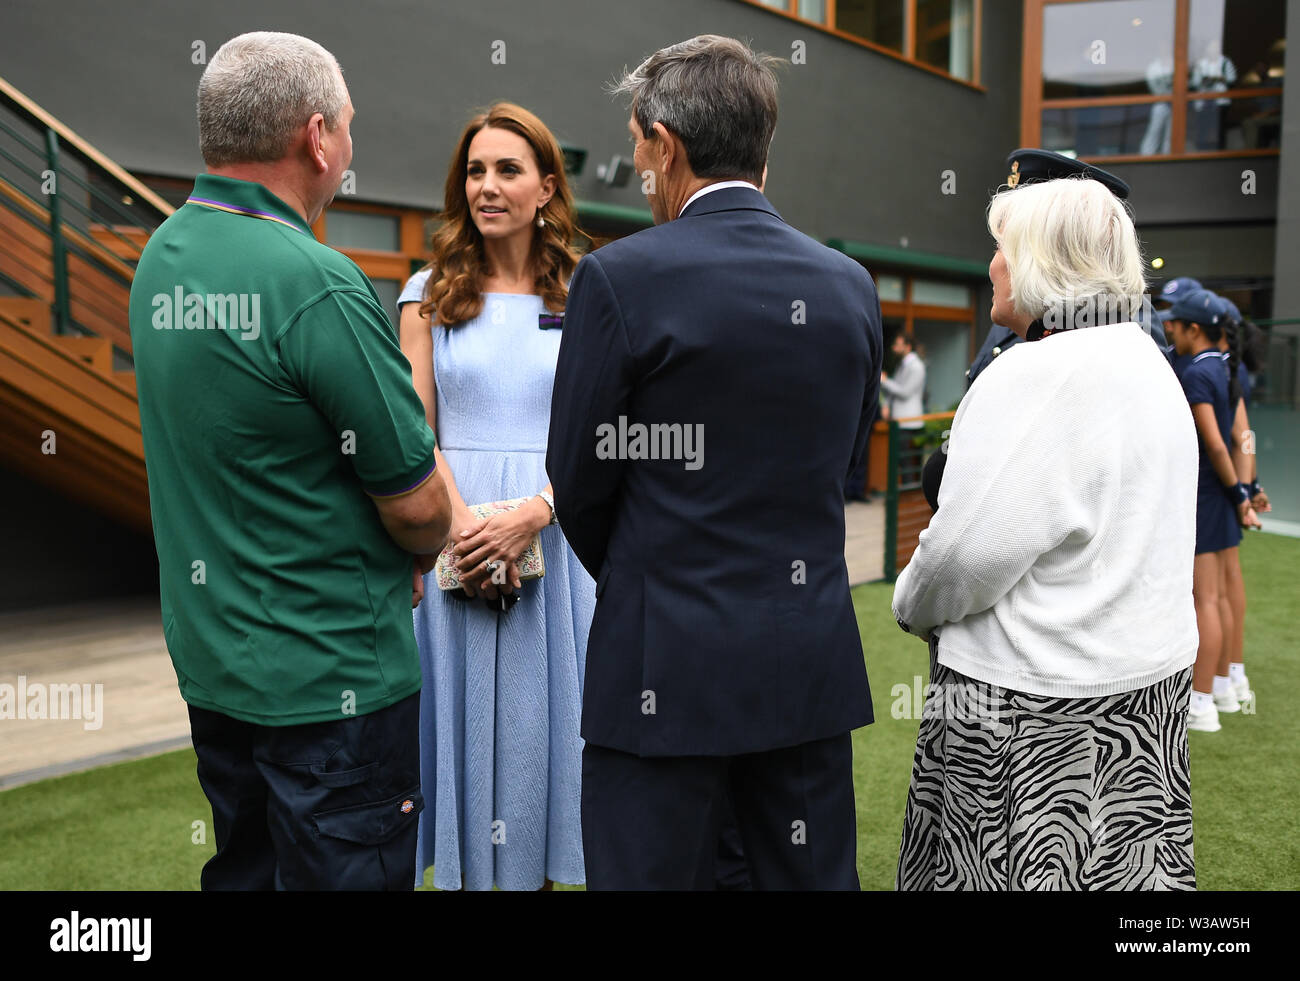 The Duke and Duchess of Cambridge meet (left to right) Mick Woods, from the AELTC facilities management department, referee Andrew Jarrett and Jayne Miller, AELTC ladies dressing room manager, ahead of the Men's Singles Final on day thirteen of the Wimbledon Championships at the All England Lawn Tennis and Croquet Club, Wimbledon. Stock Photo